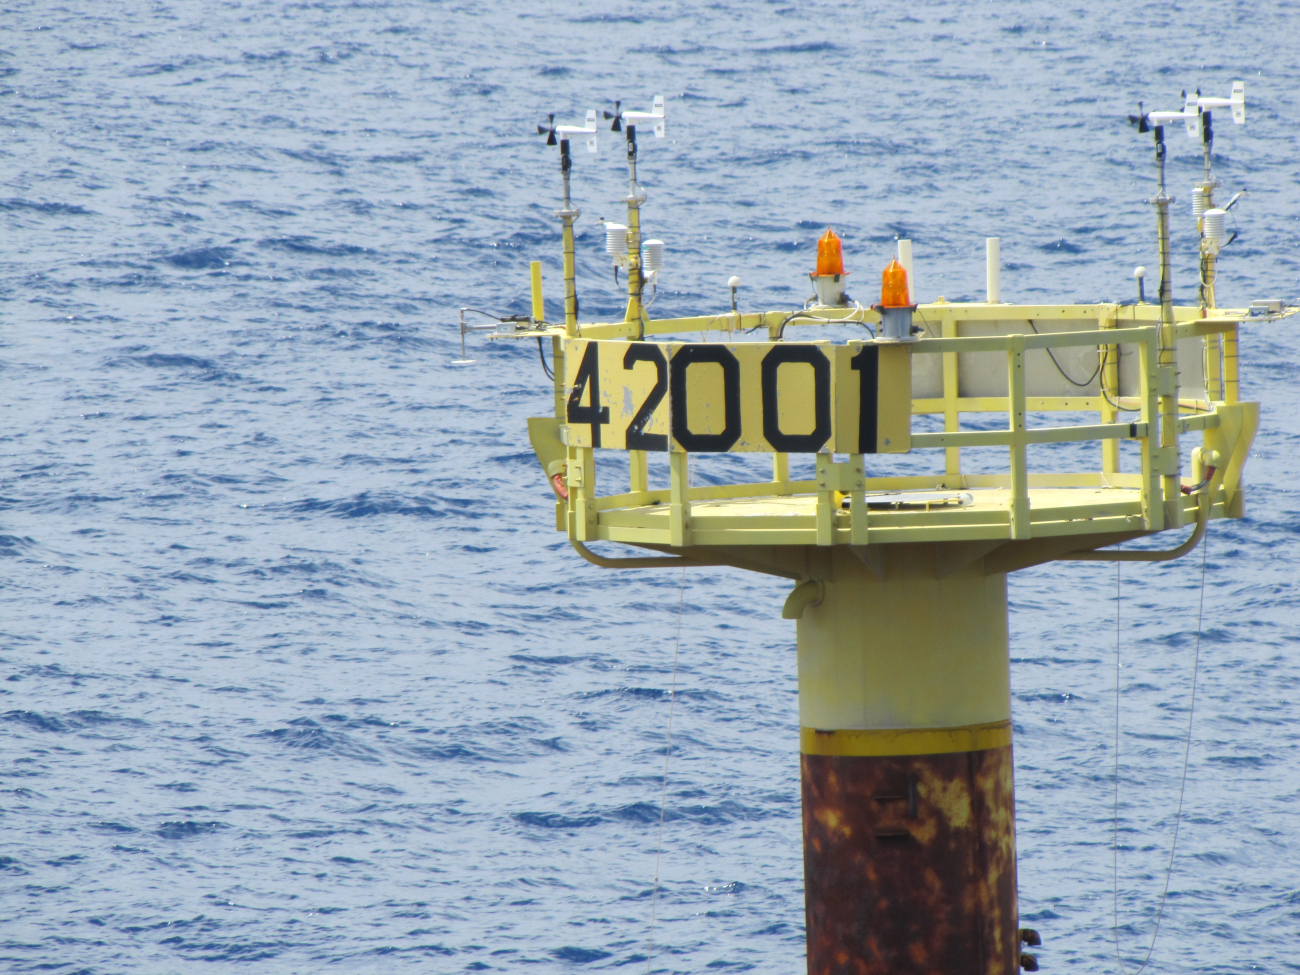 10- or 12- meter discus buoy moored in the central Gulf of Mexico